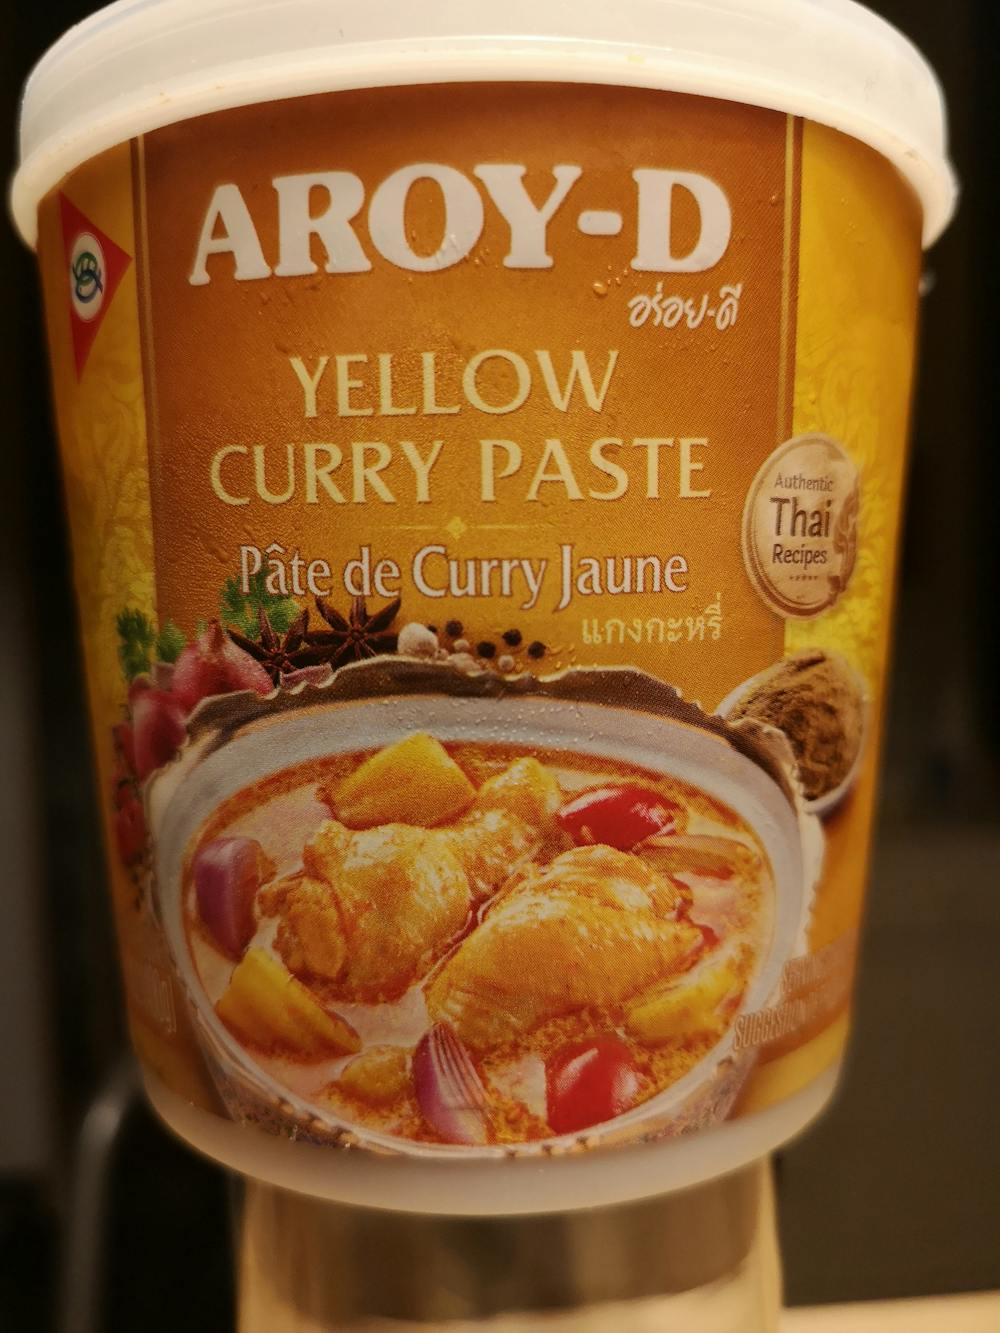 Yellow curry paste, Aroy-d